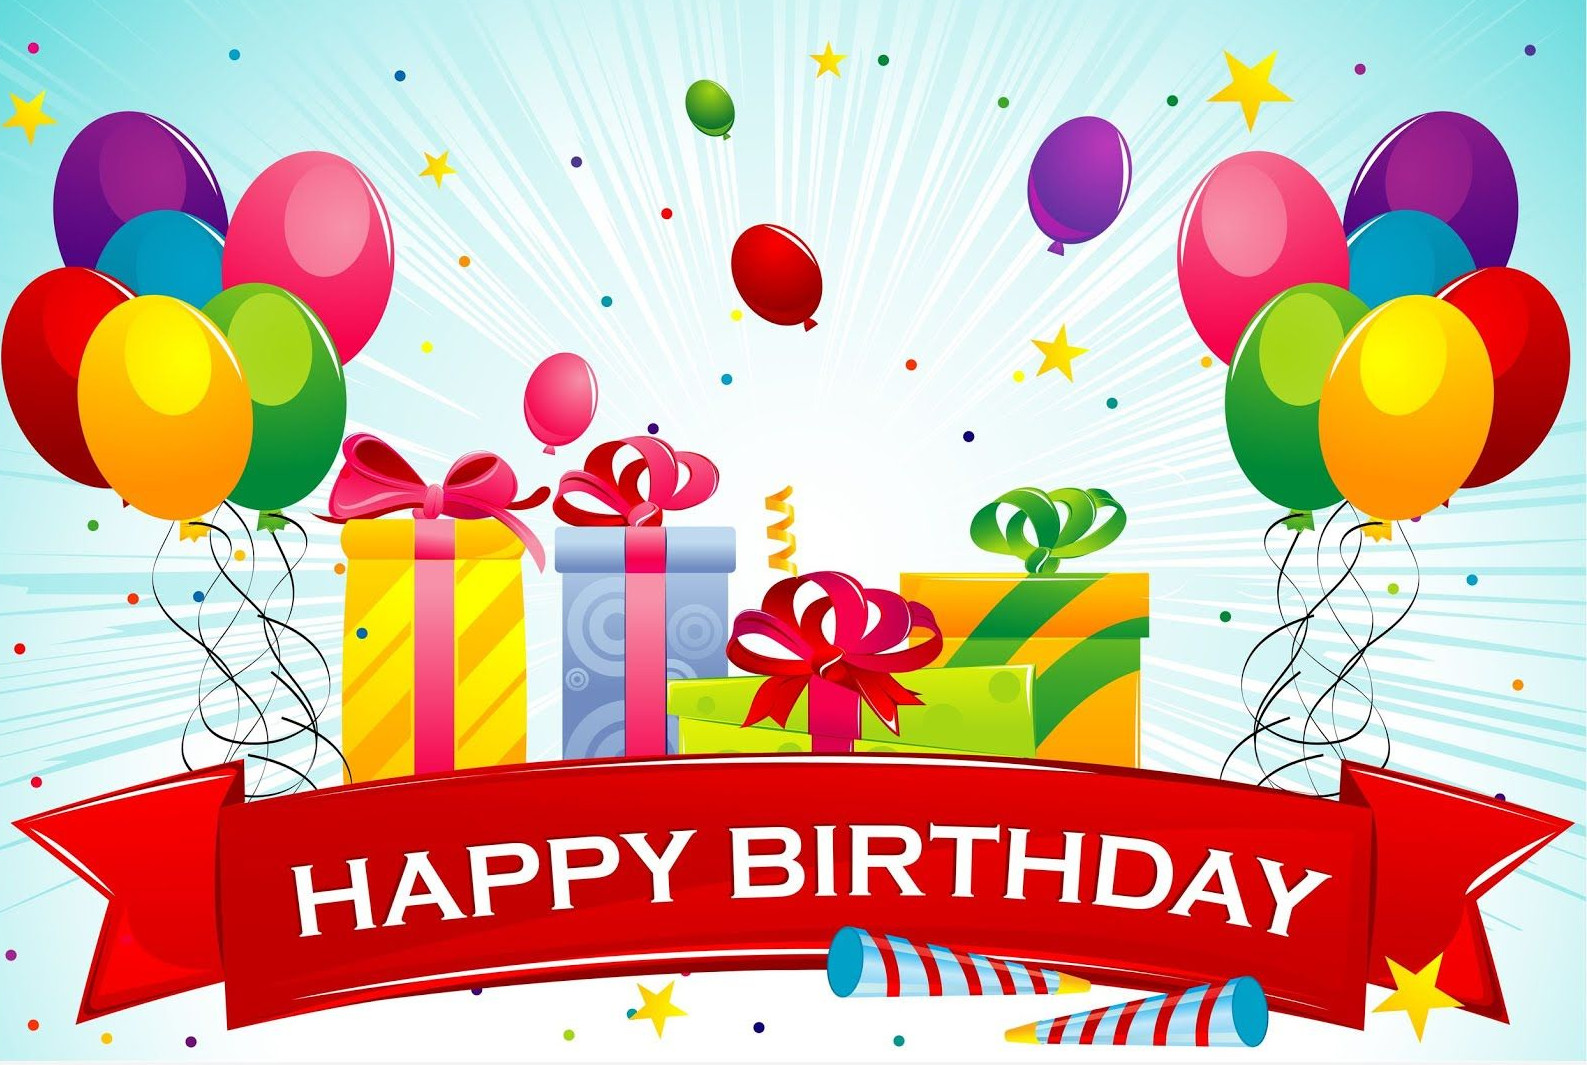 Birthday Card Online Free
 35 Happy Birthday Cards Free To Download – The WoW Style